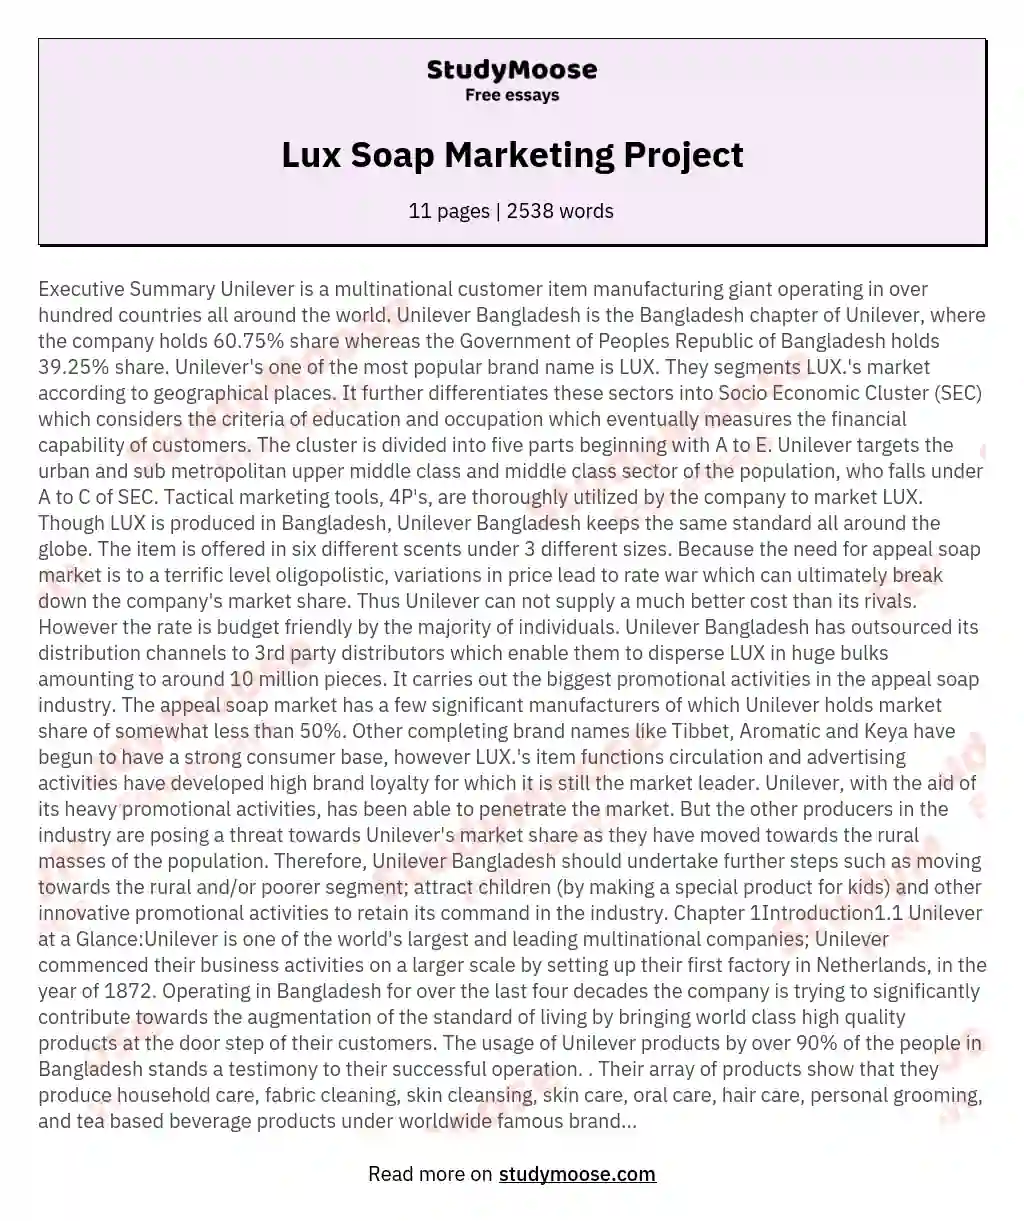 Lux Soap Marketing Project